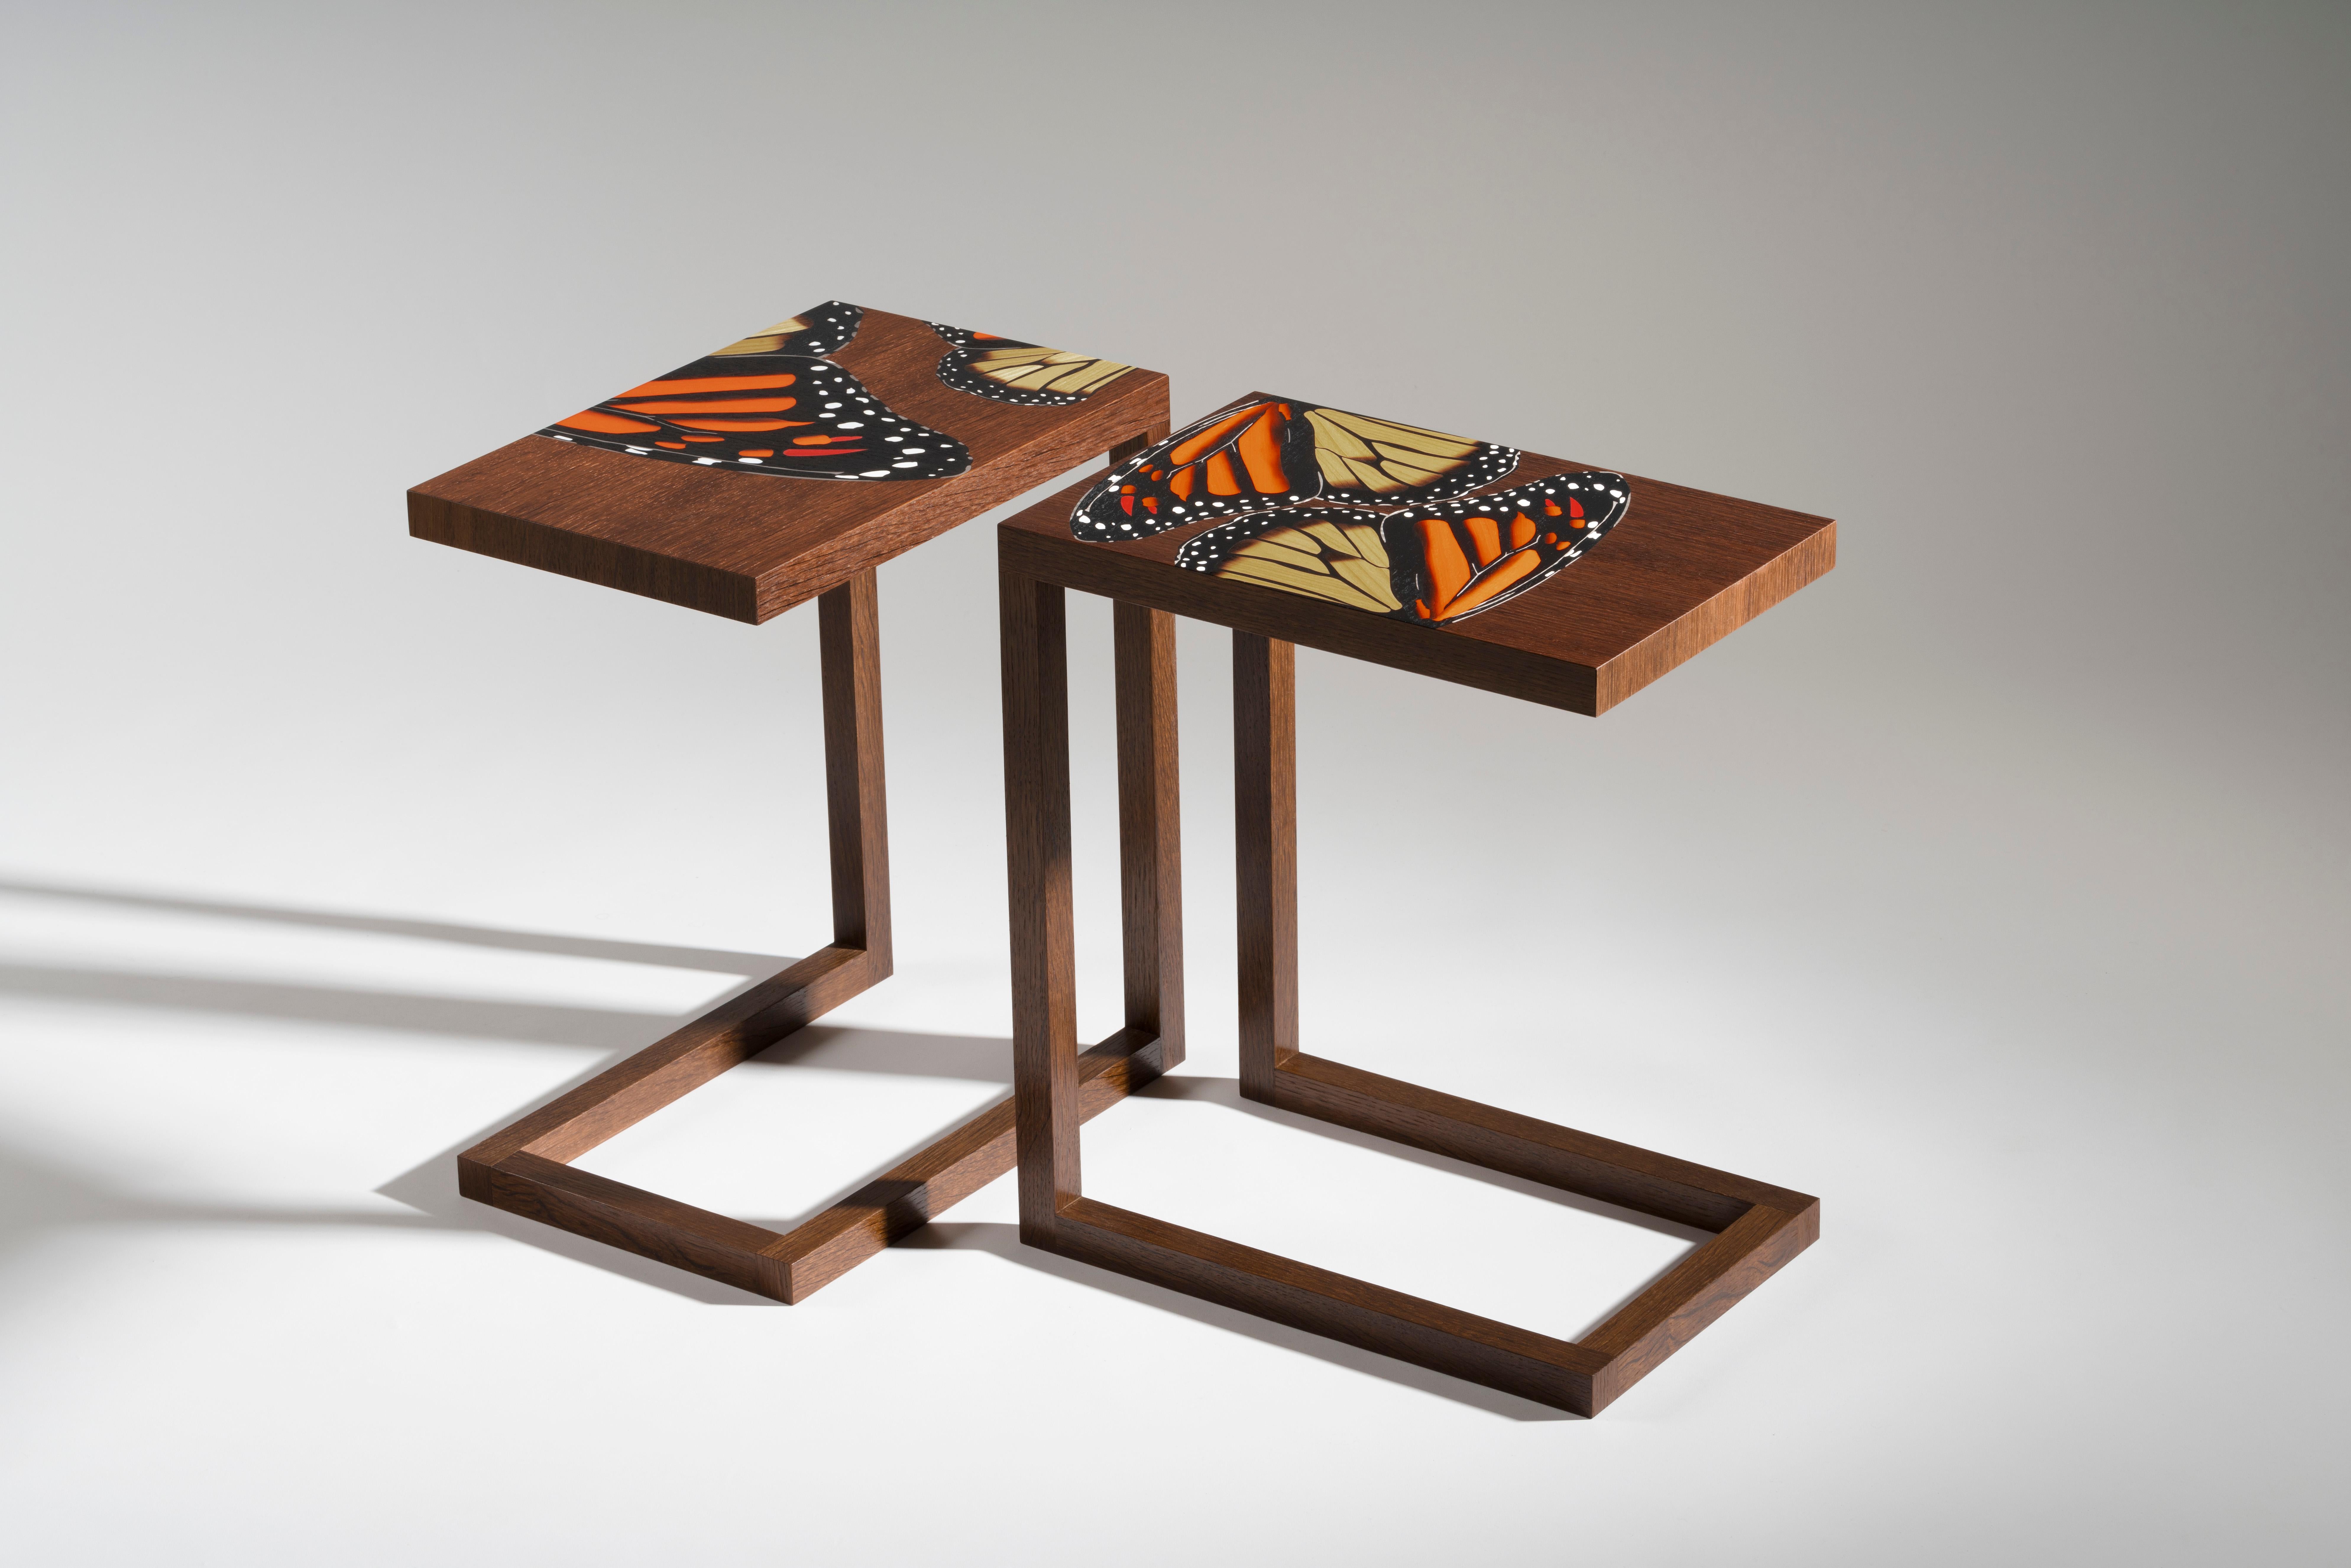 Zelouf + Bell's end tables are delicate-looking, yet surprisingly strong and stabile. Graphic fragments of butterfly wings created with marquetry using pressure-dyed timbers inlaid in a smoked oak background hand-rubbed to satin finish. Available in